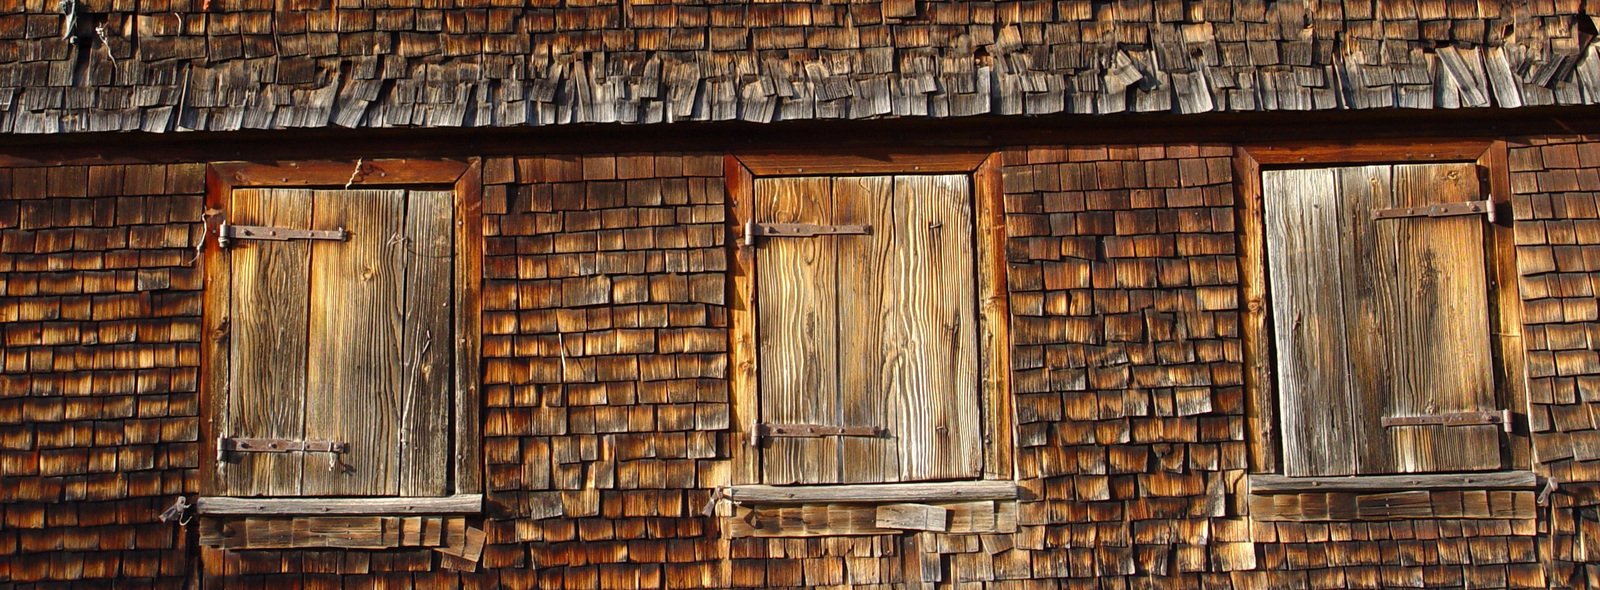 three wood windows sit on the side of an old wooden building